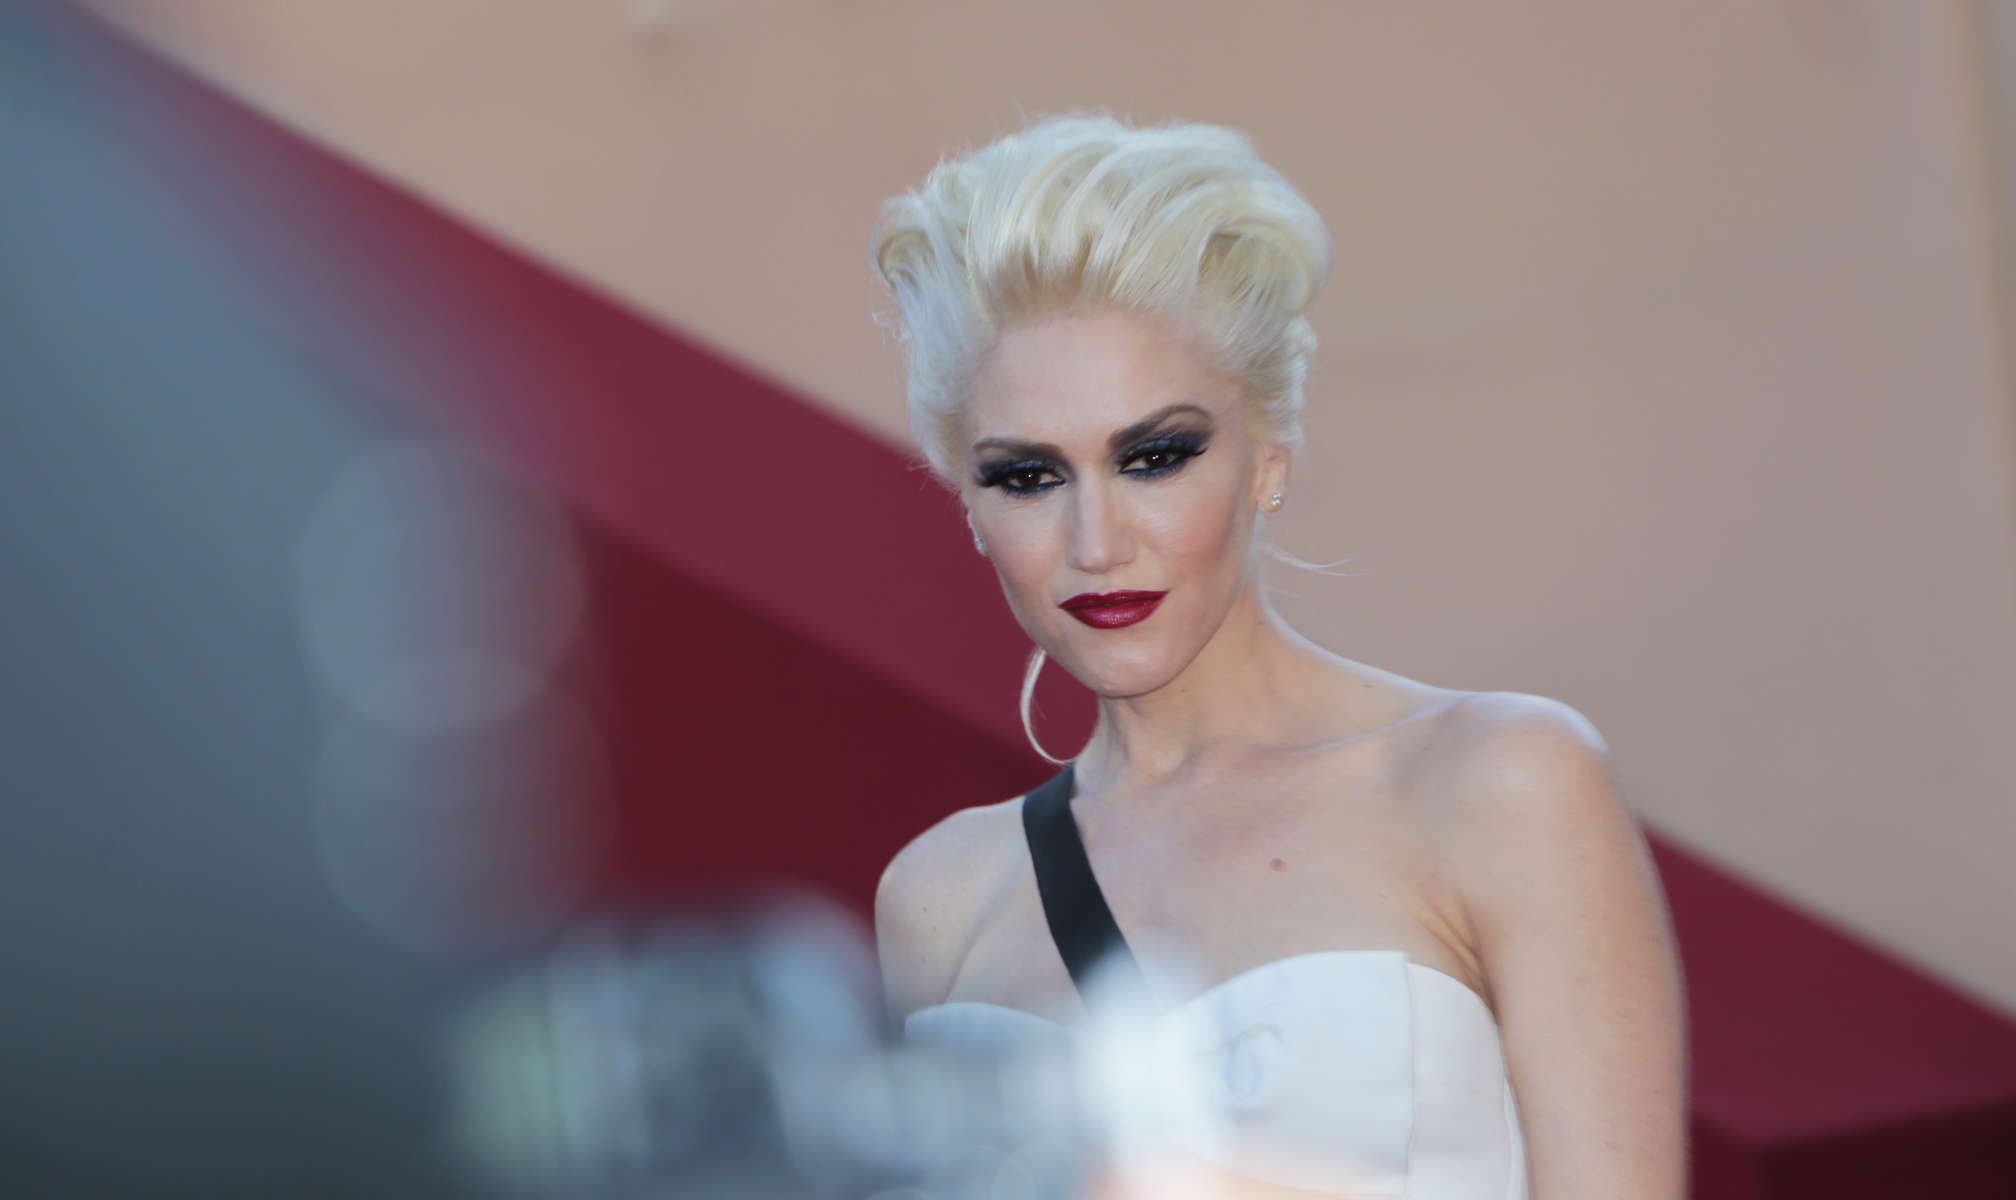 Singer Gwen Stefani arrives at the screening of 'This Must Be The Place' at the Palais des Festivals during the Cannes Film Festival in Cannes, France. 